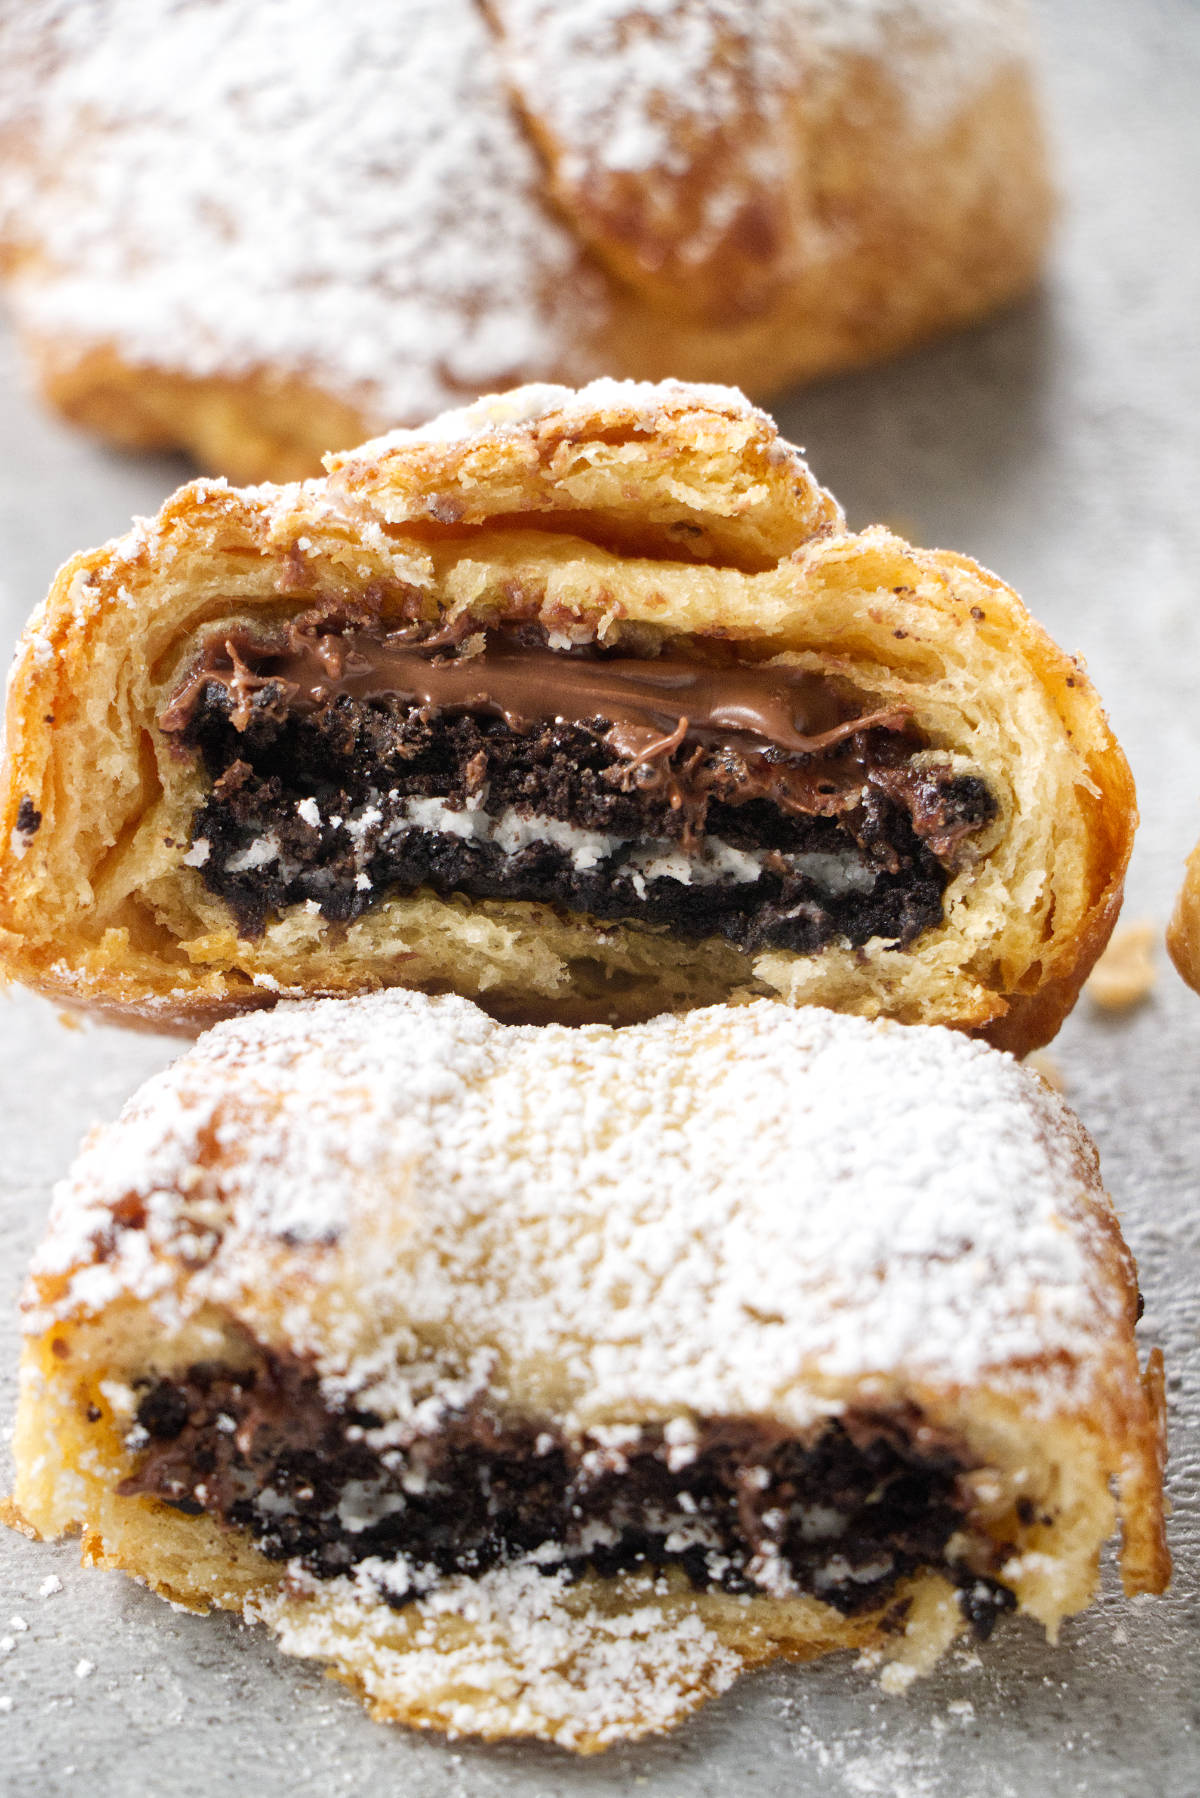 Two air fried oreos that have been bitten into with chocolate nutella dripping out.